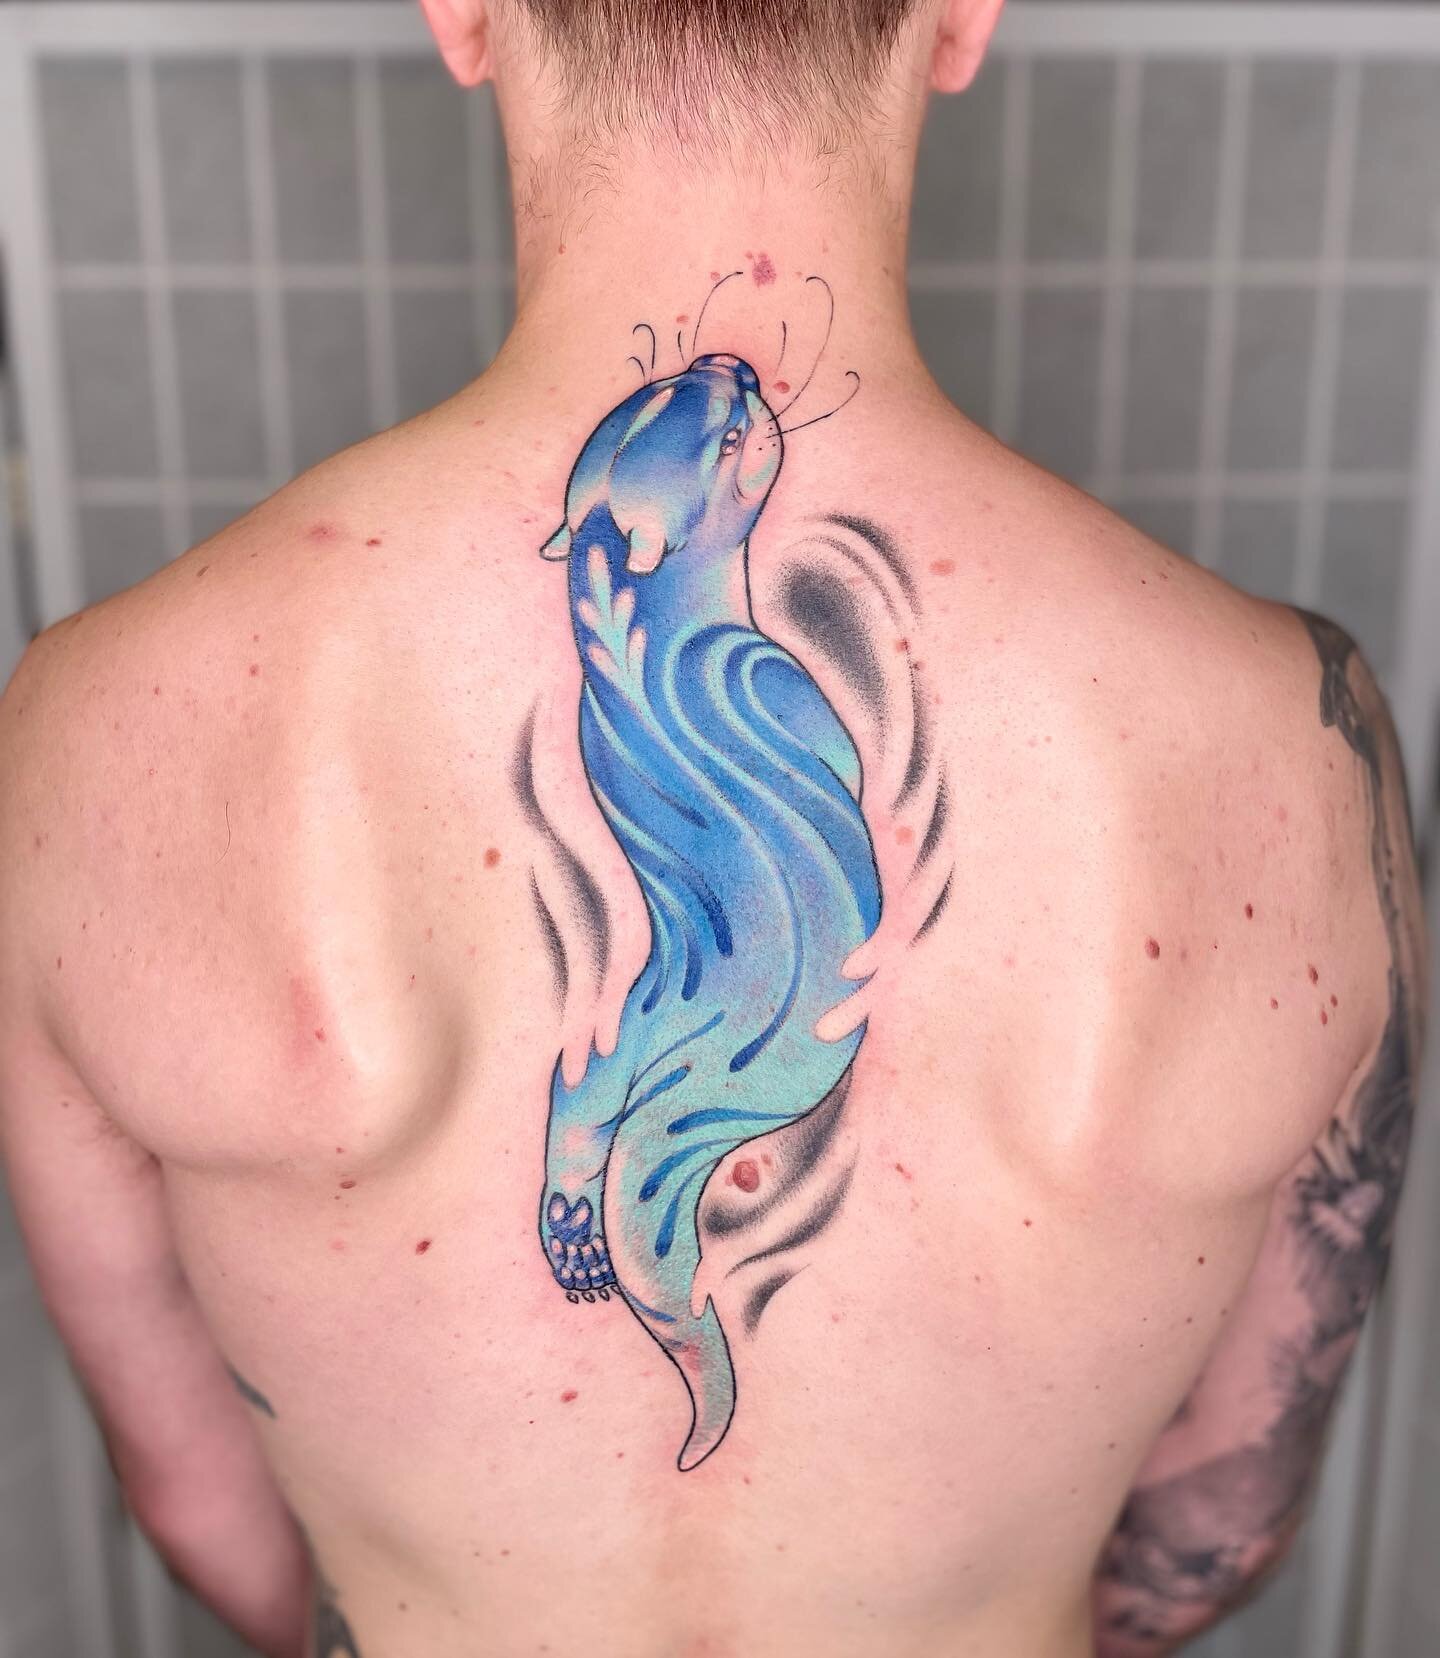 Blue Otter 🦦 
Thank you for the trust Clayton! You were such positive energy 💙 so glad we could bring this little otter to life 🥰

#pdxtattoo #portlandtattoo #freehandtattoo #freehand #blueottertattoo #blueotter #otter #ottertattoo #tattoo #colort